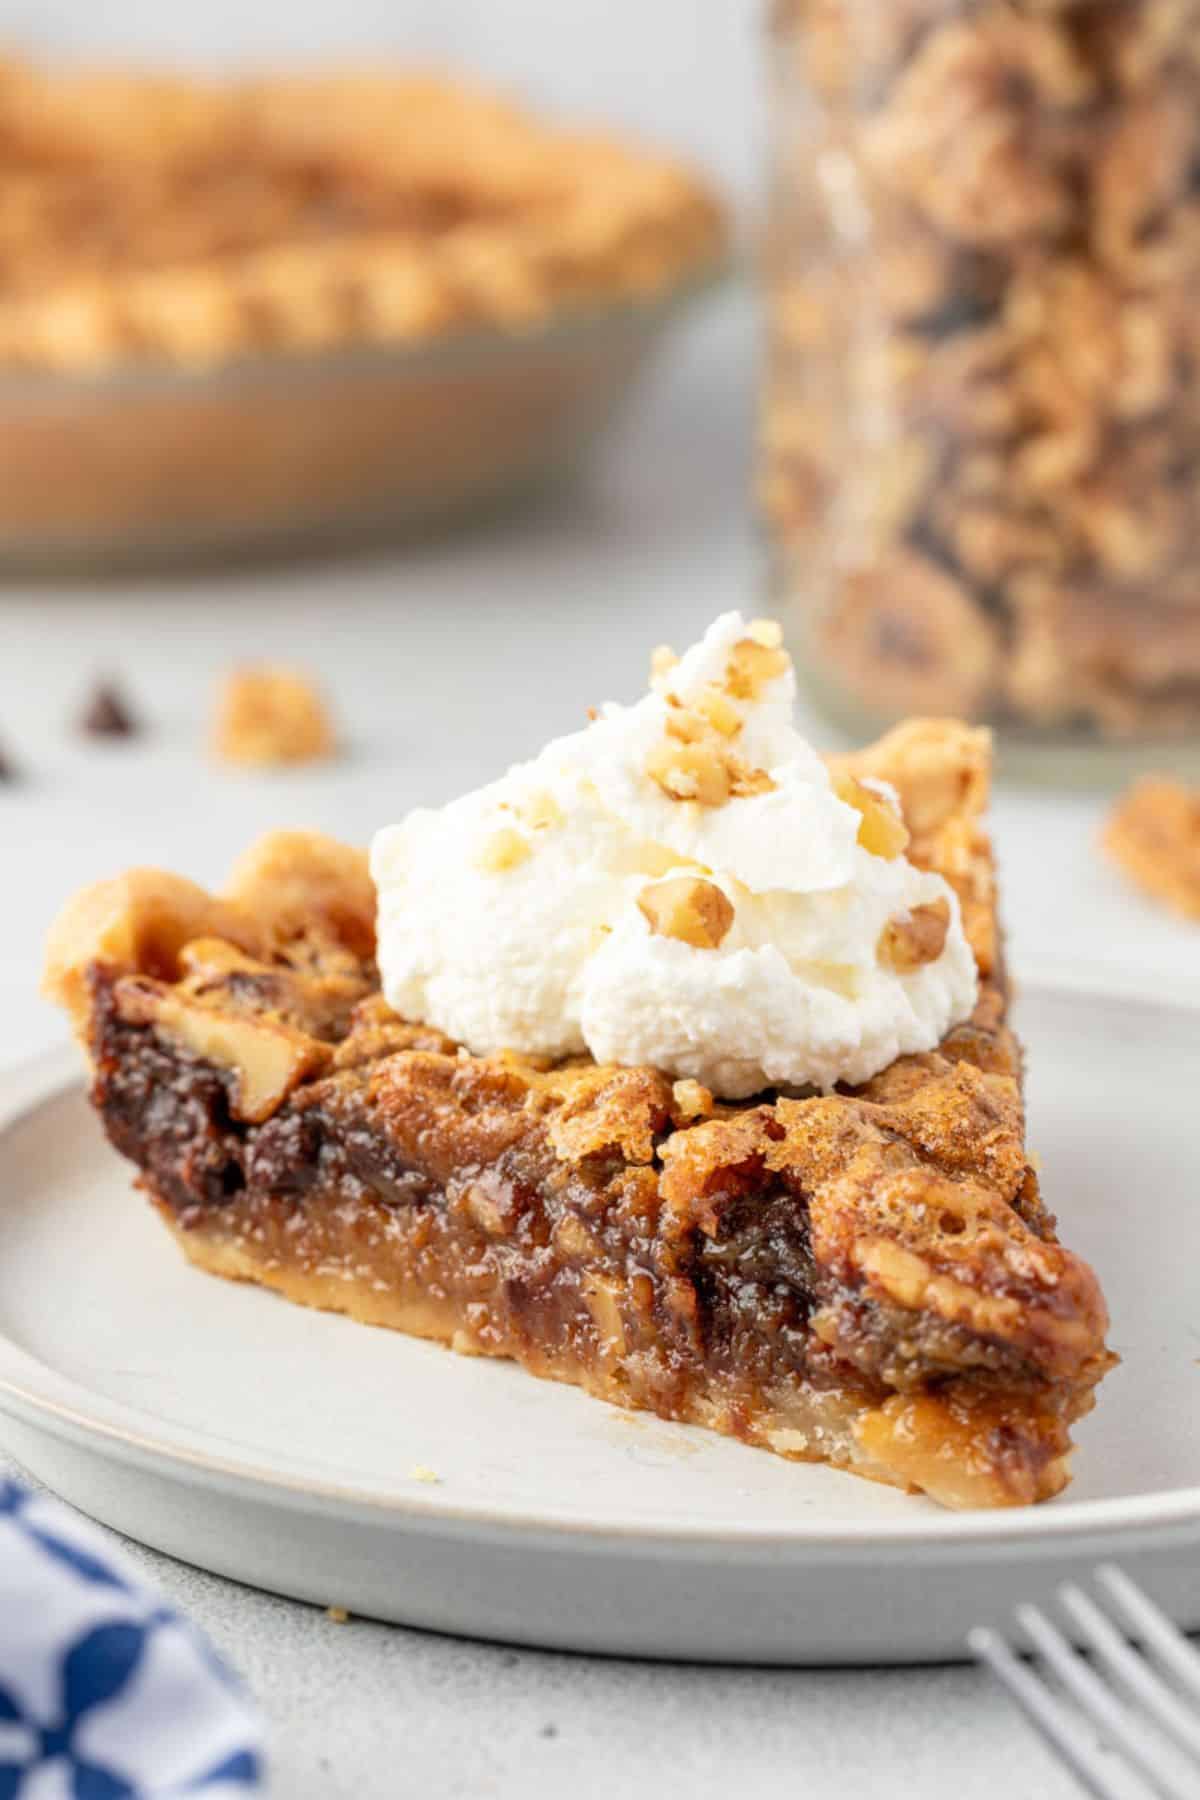 A slice of pie topped with whipped cream, with the whole pie and a jar of walnuts in background.